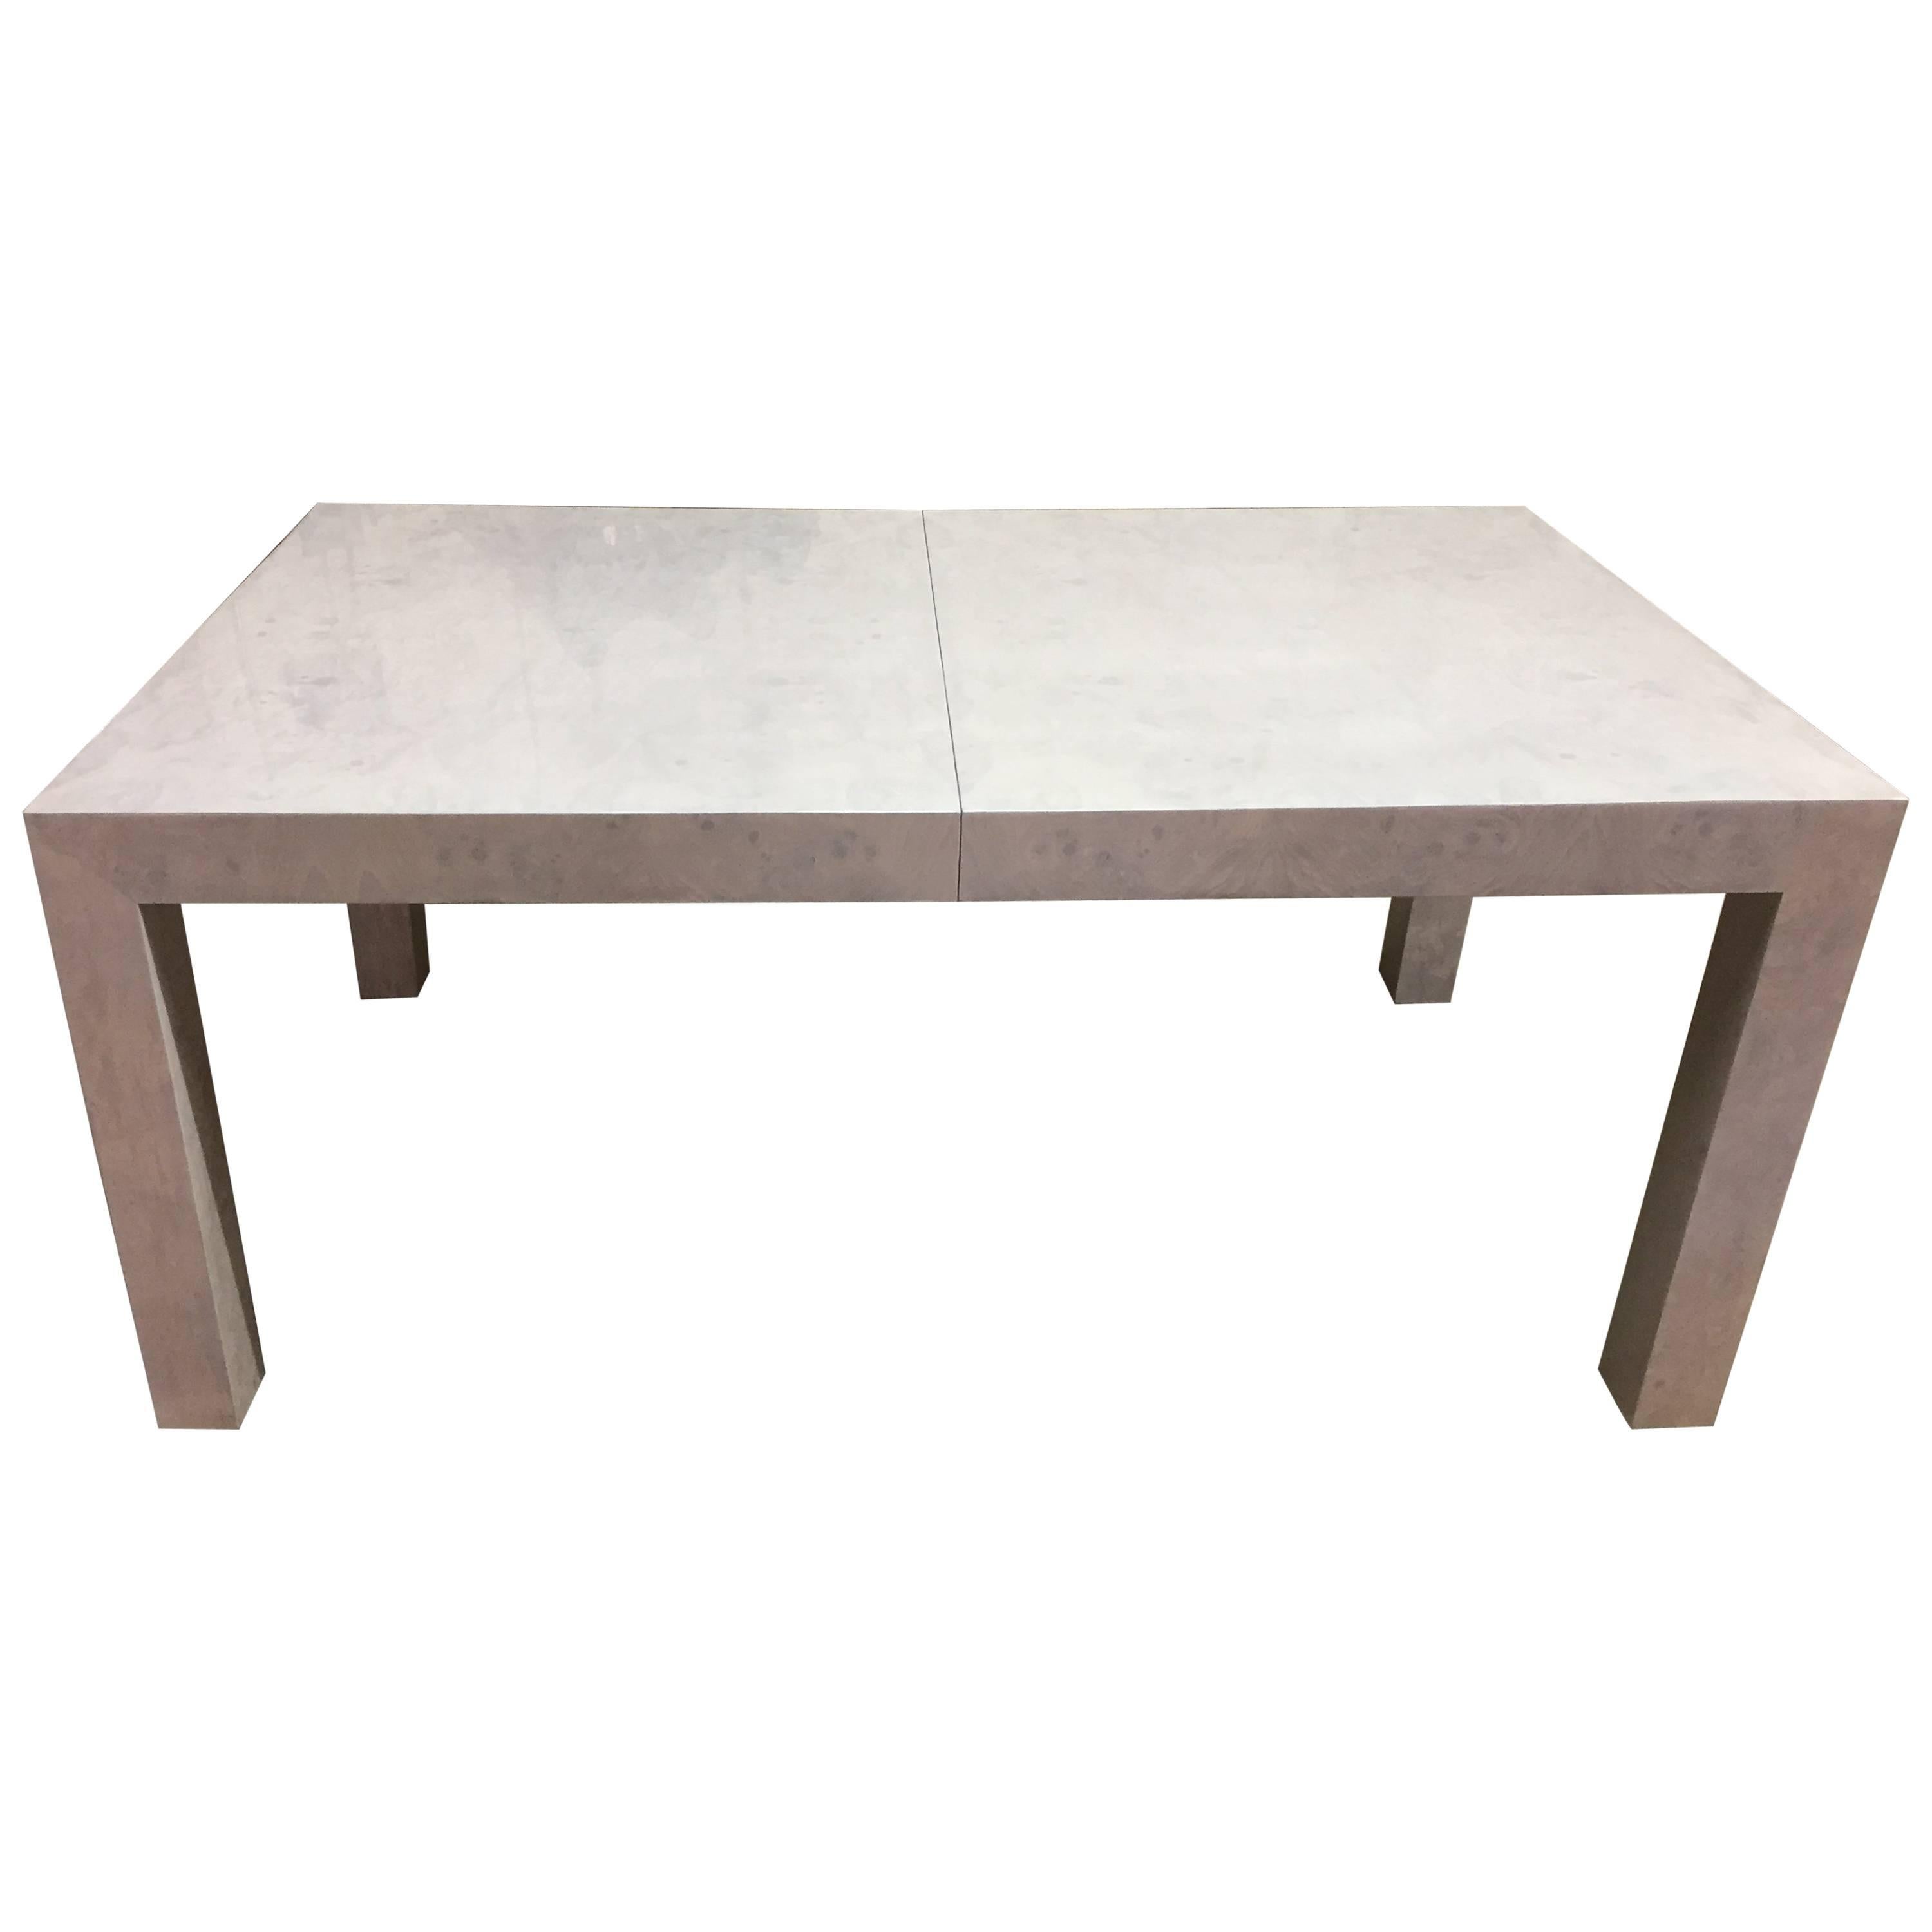 White Washed Dining Table For Sale